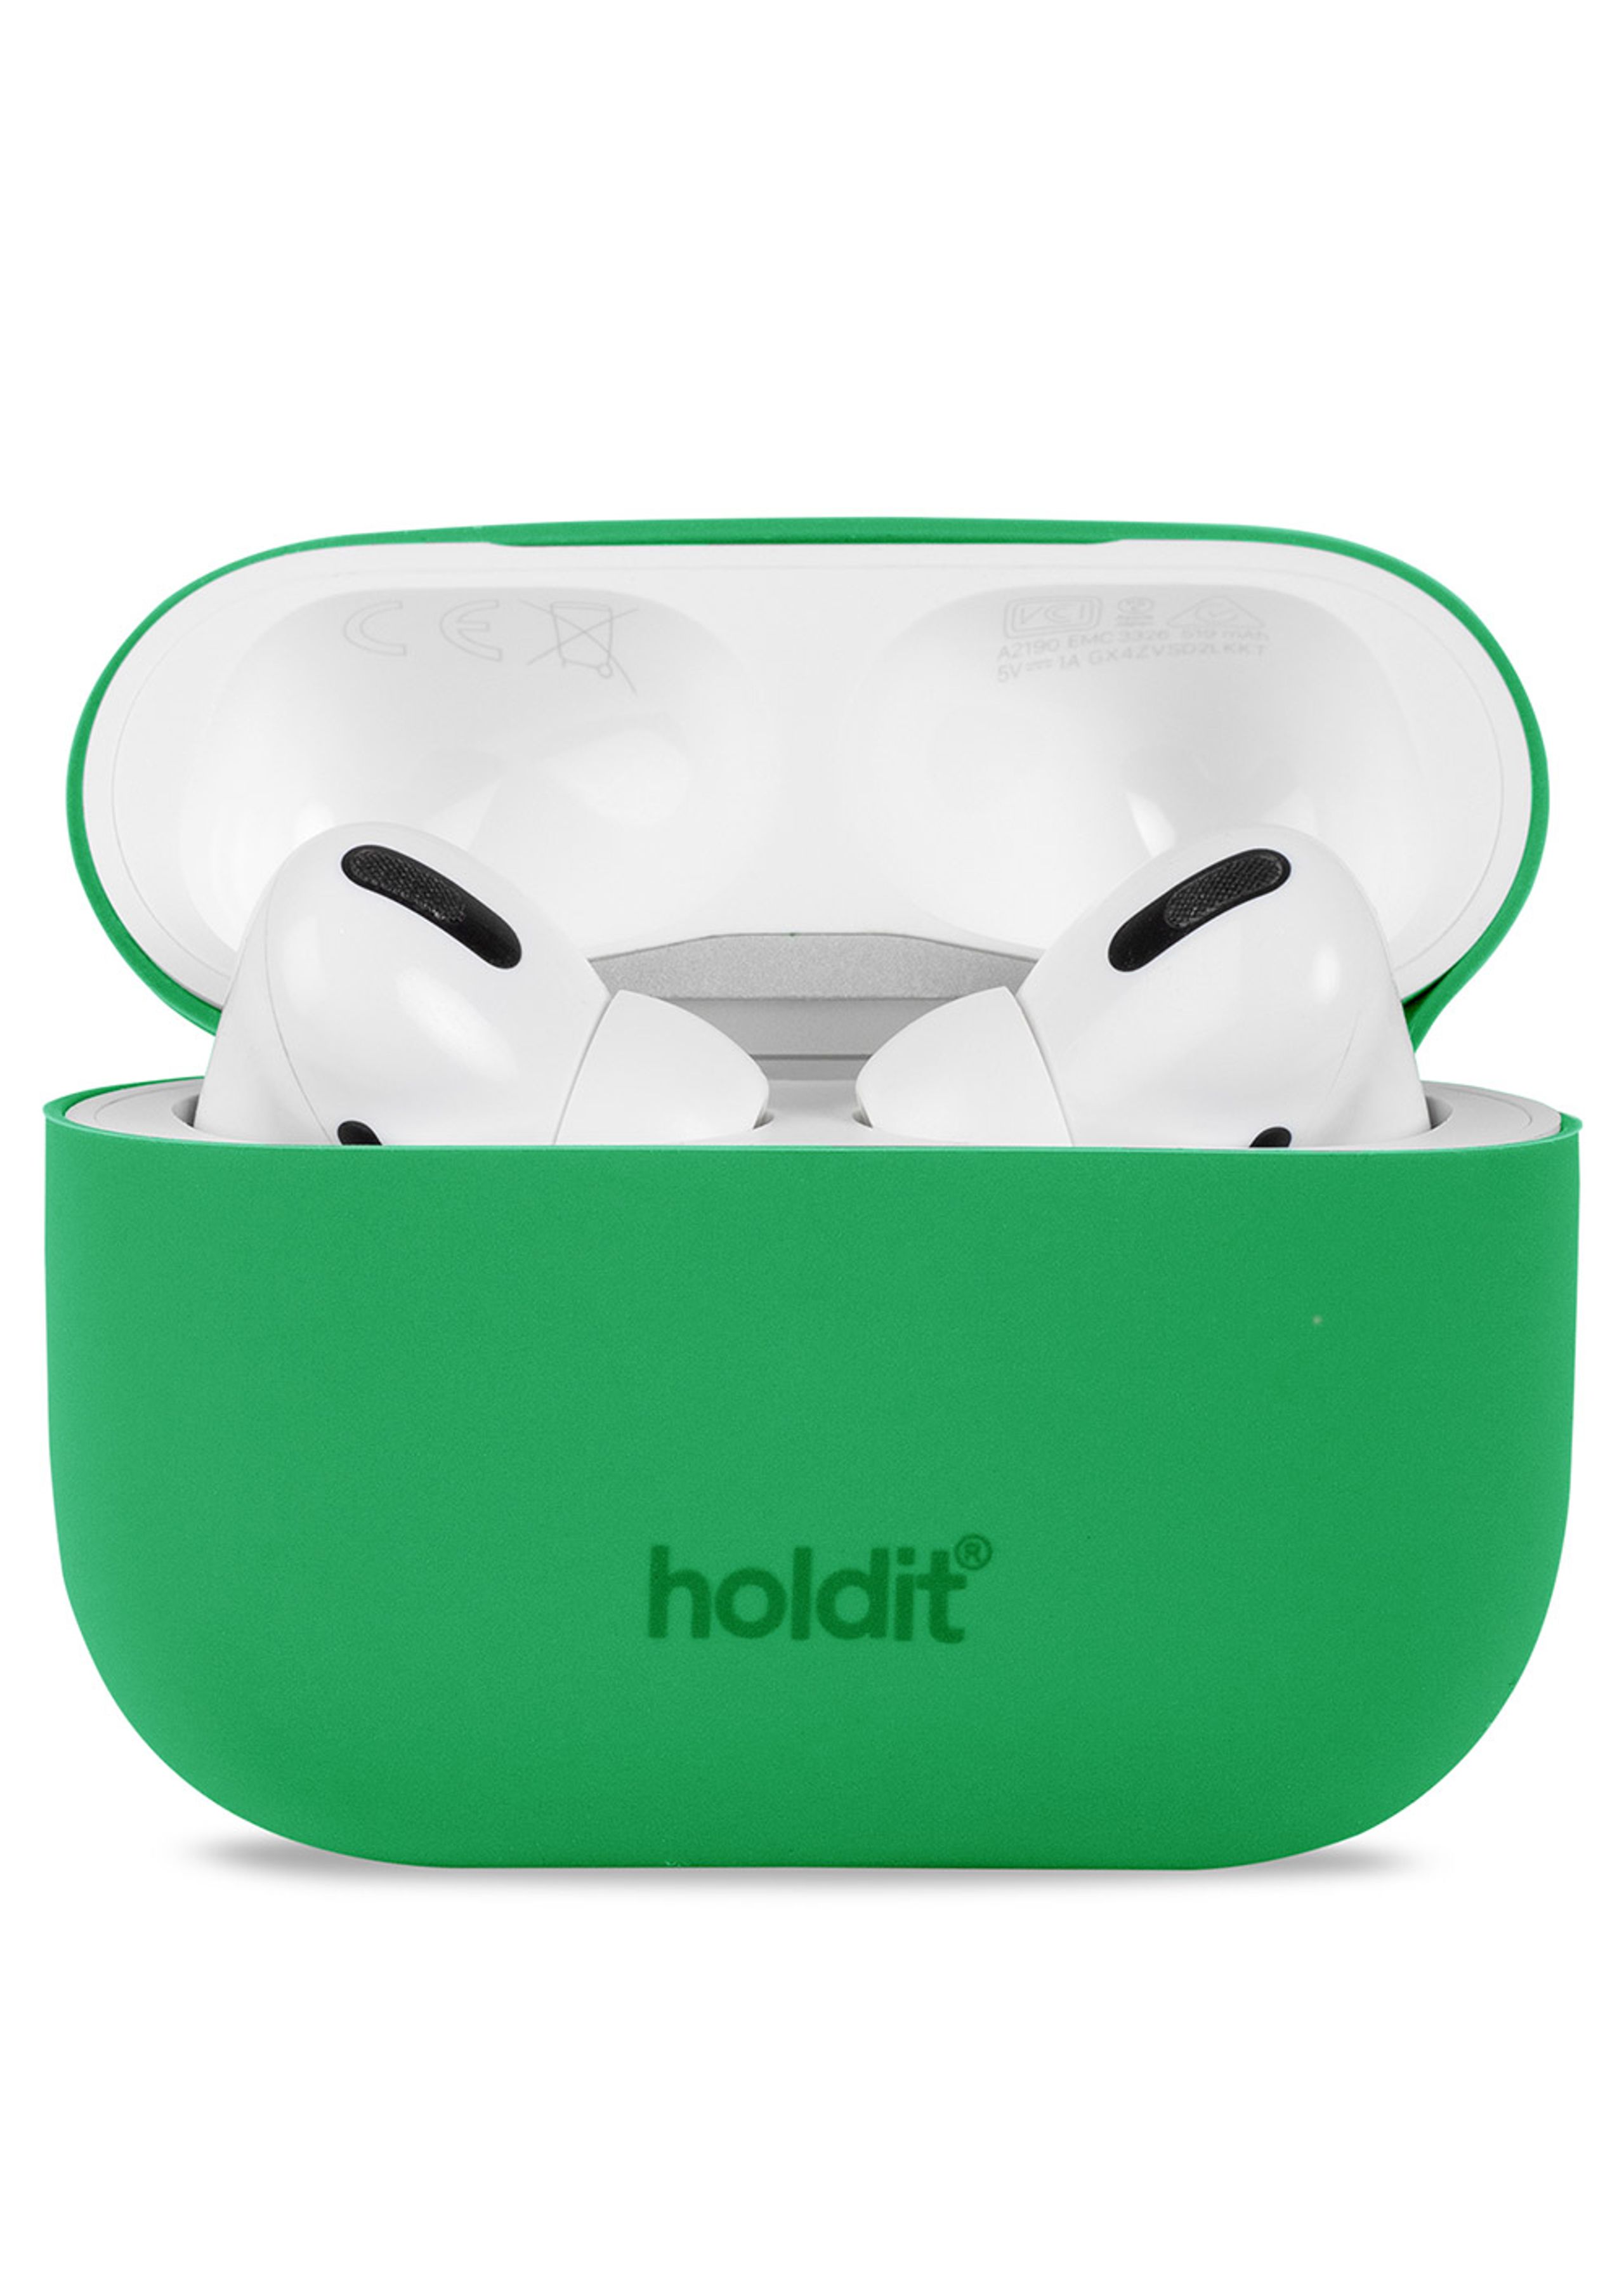 Pro Case Airpods Case - Holdit